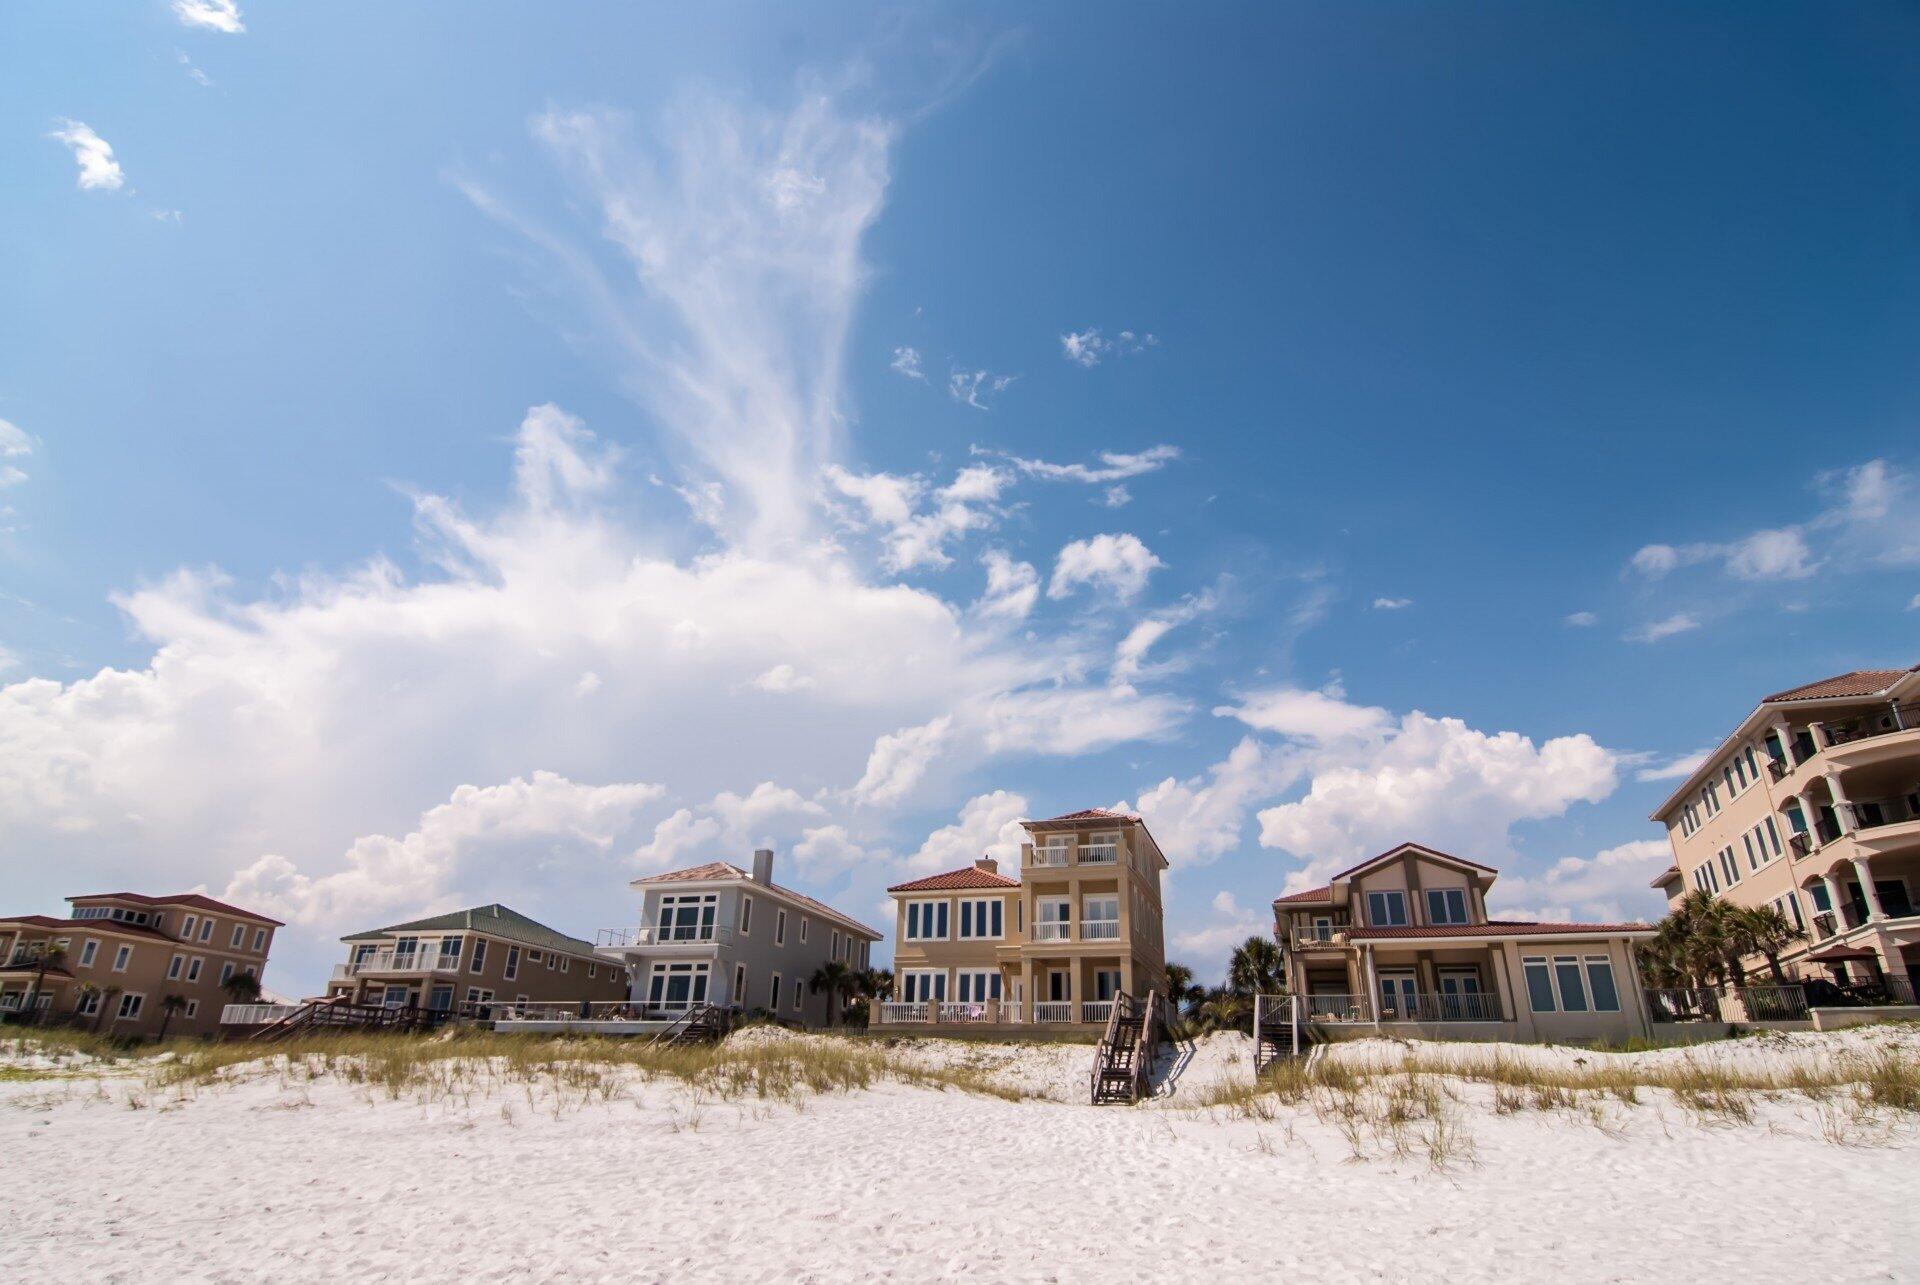 Vacation Rental Property Management in Madeira Beach: Dos and Don'ts